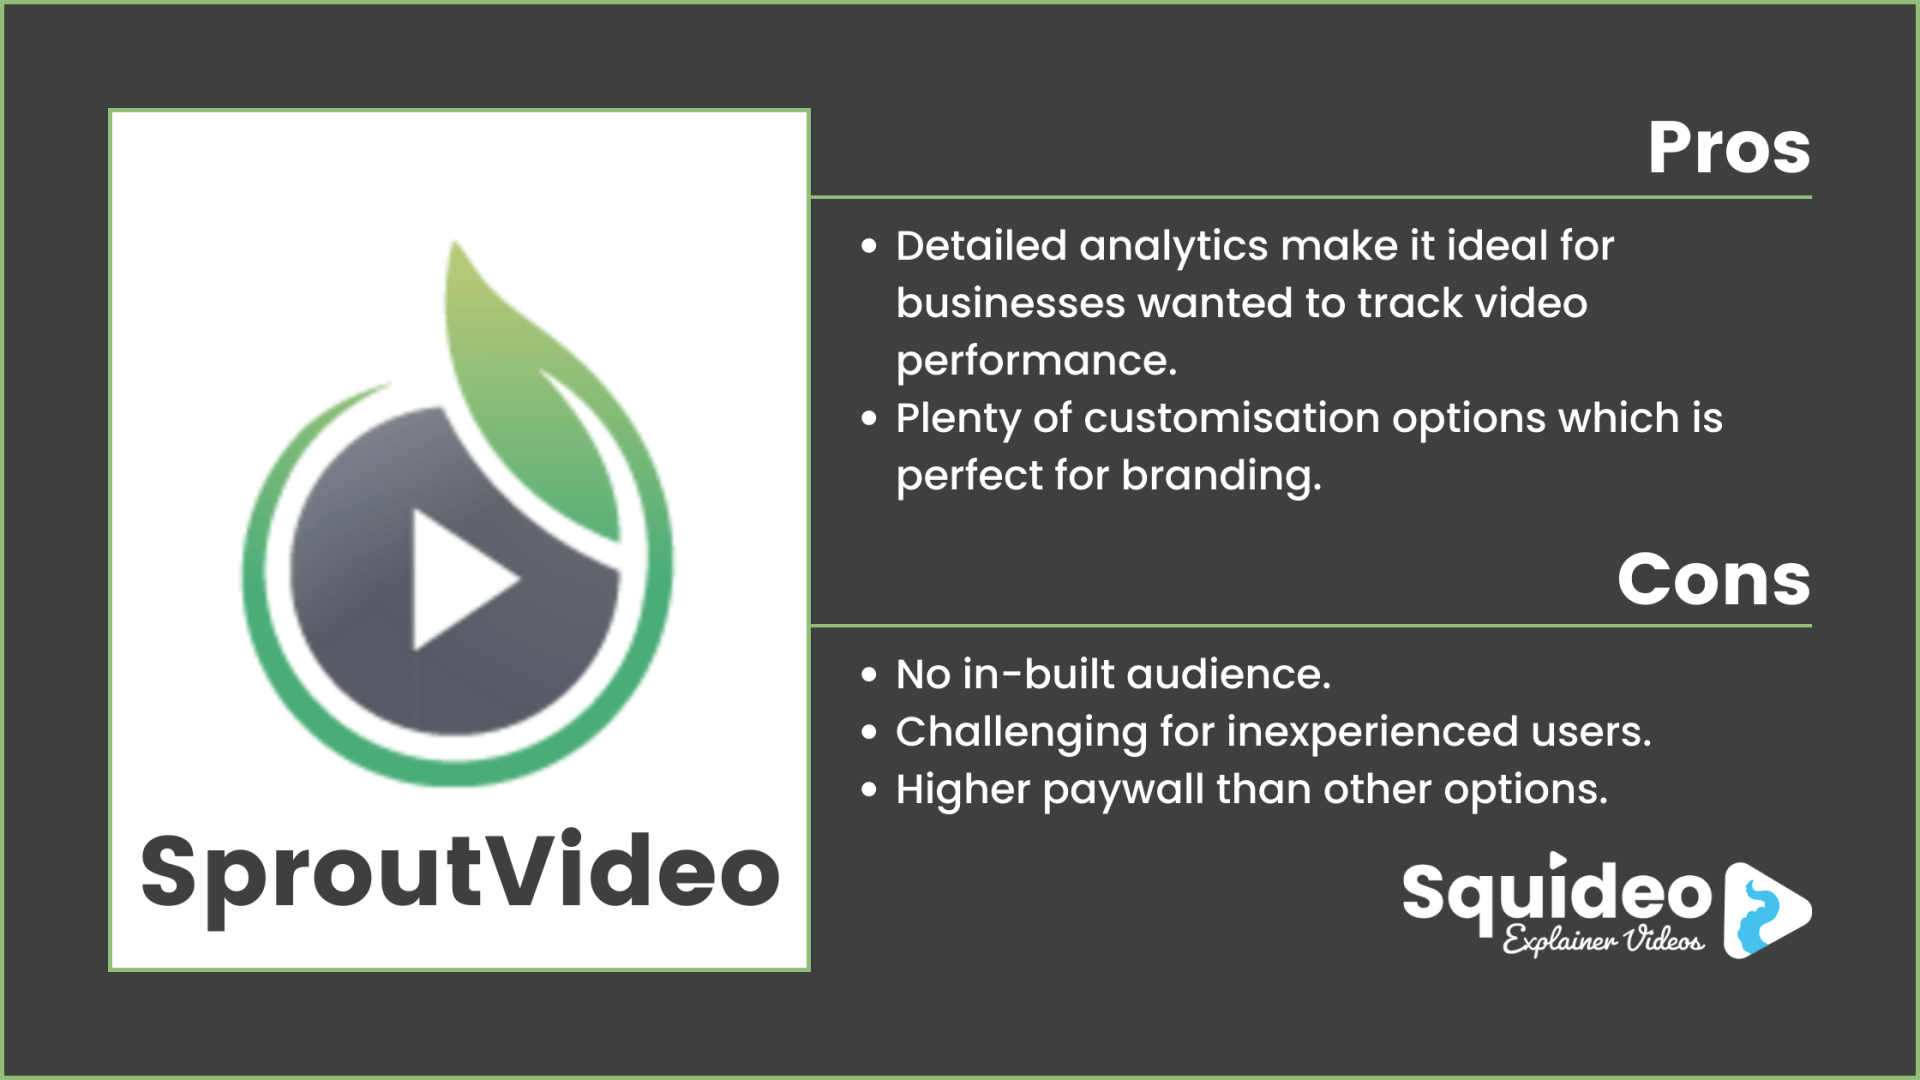 SproutVideo Video Pros and Cons